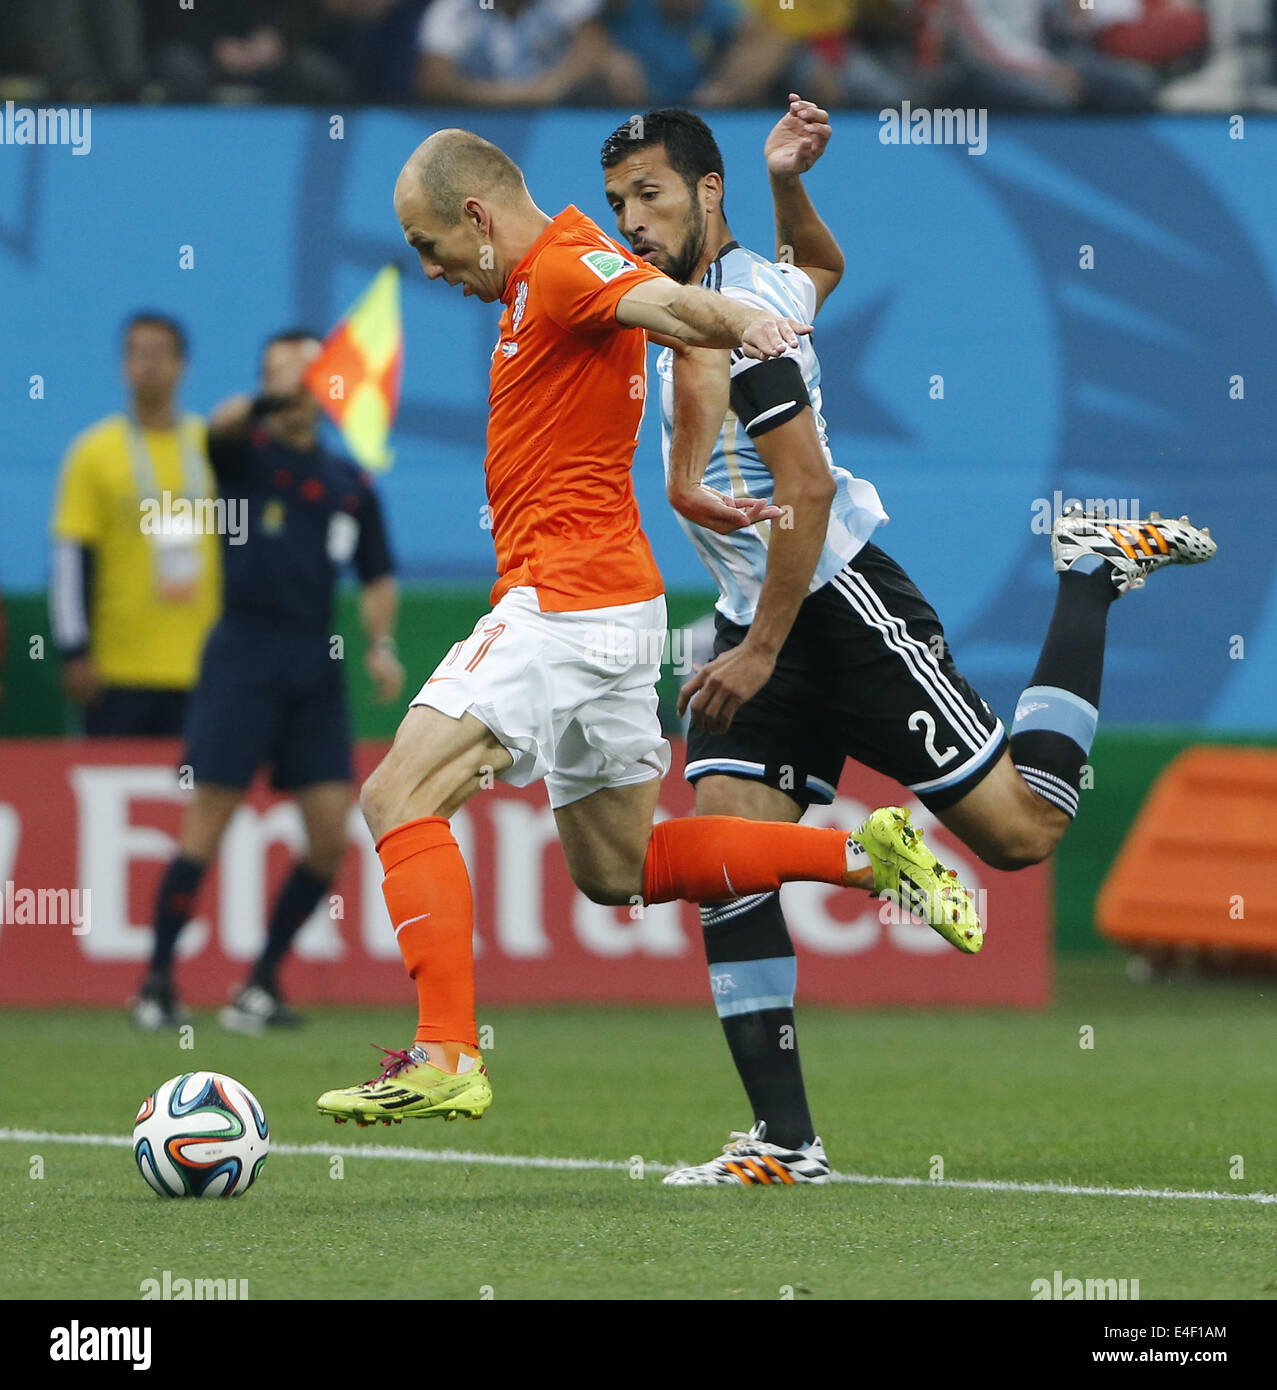 Sao Paulo, Brazil. 9th July, 2014. Netherlands' Arjen Robben (L) vies with Argentina's Ezequiel Garay during a semifinal match between Netherlands and Argentina of 2014 FIFA World Cup at the Arena de Sao Paulo Stadium in Sao Paulo, Brazil, on July 9, 2014. Credit:  Zhou Lei/Xinhua/Alamy Live News Stock Photo